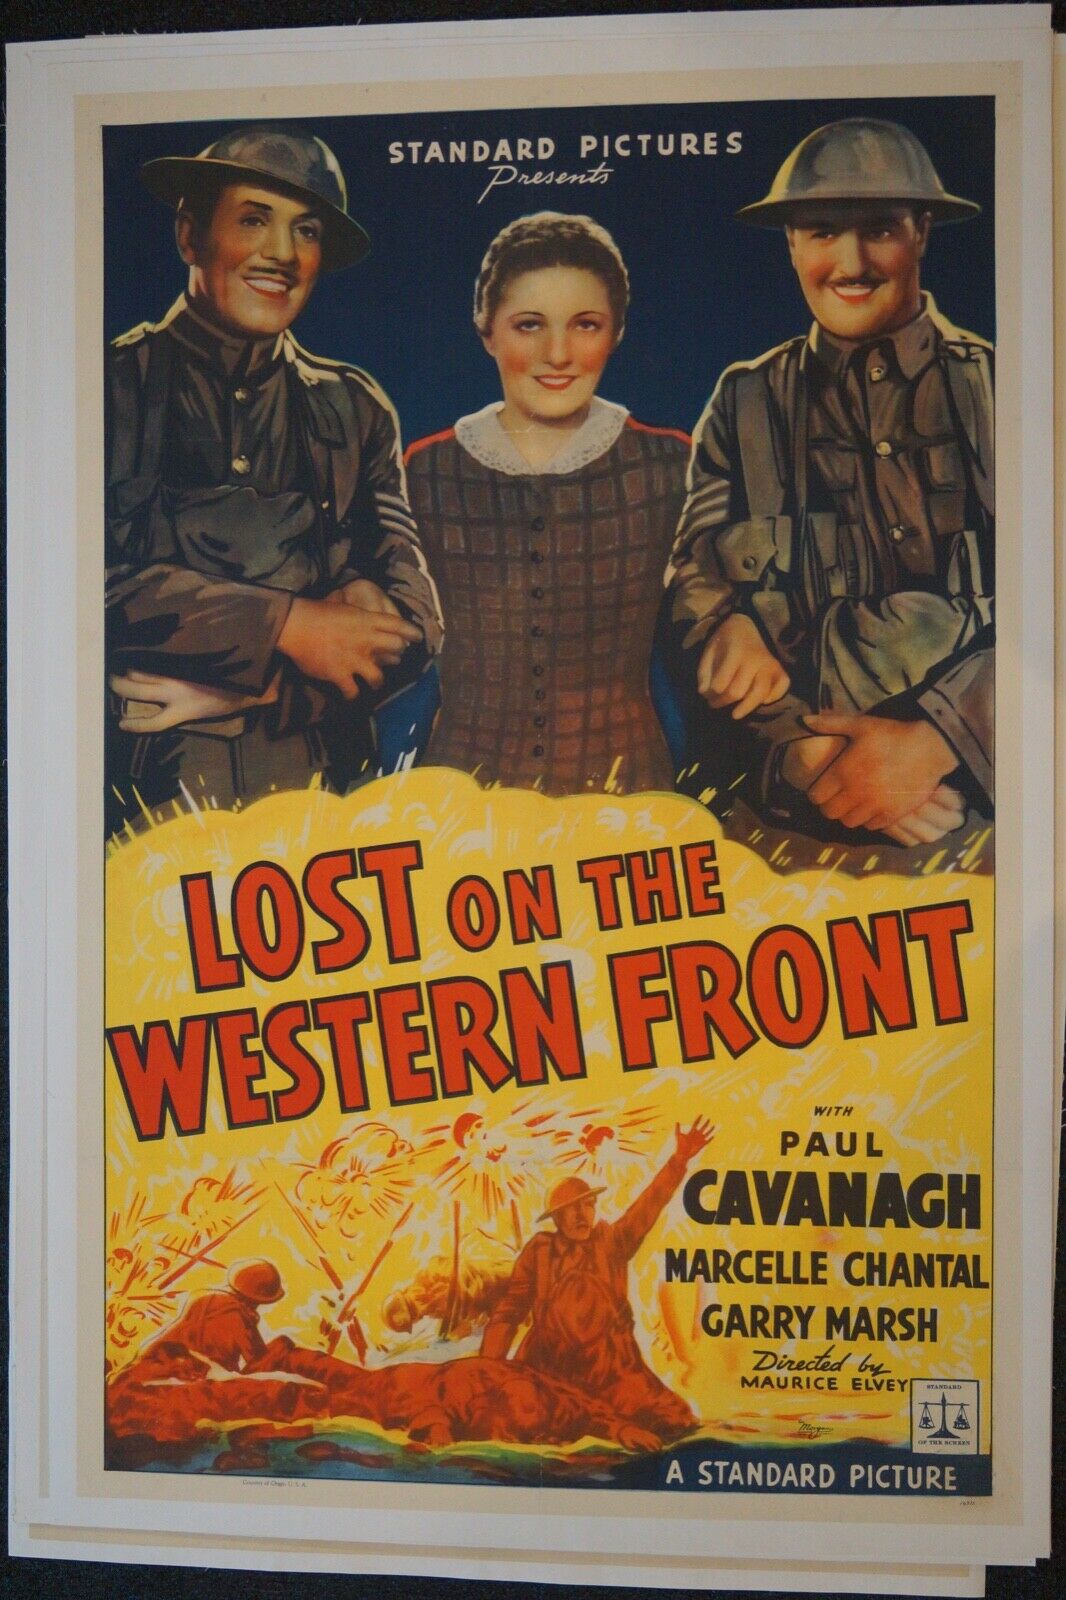 Lost On The Western Front (on Linen) - Paul Cavanagh (1937)